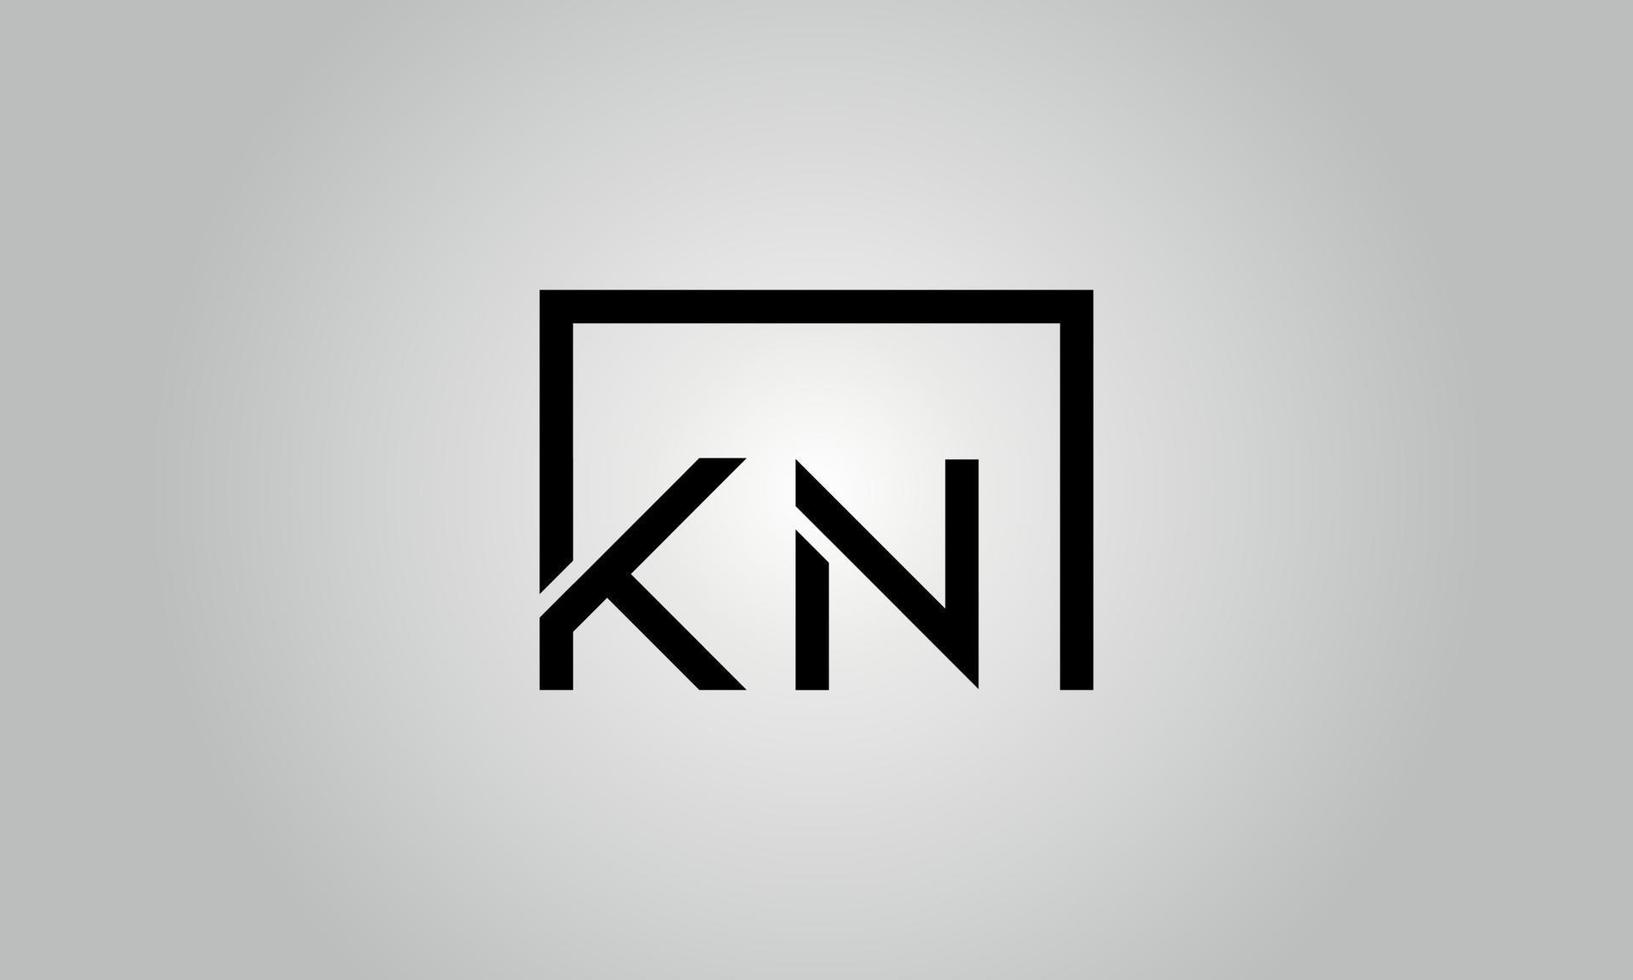 Letter KN logo design. KN logo with square shape in black colors vector free vector template.